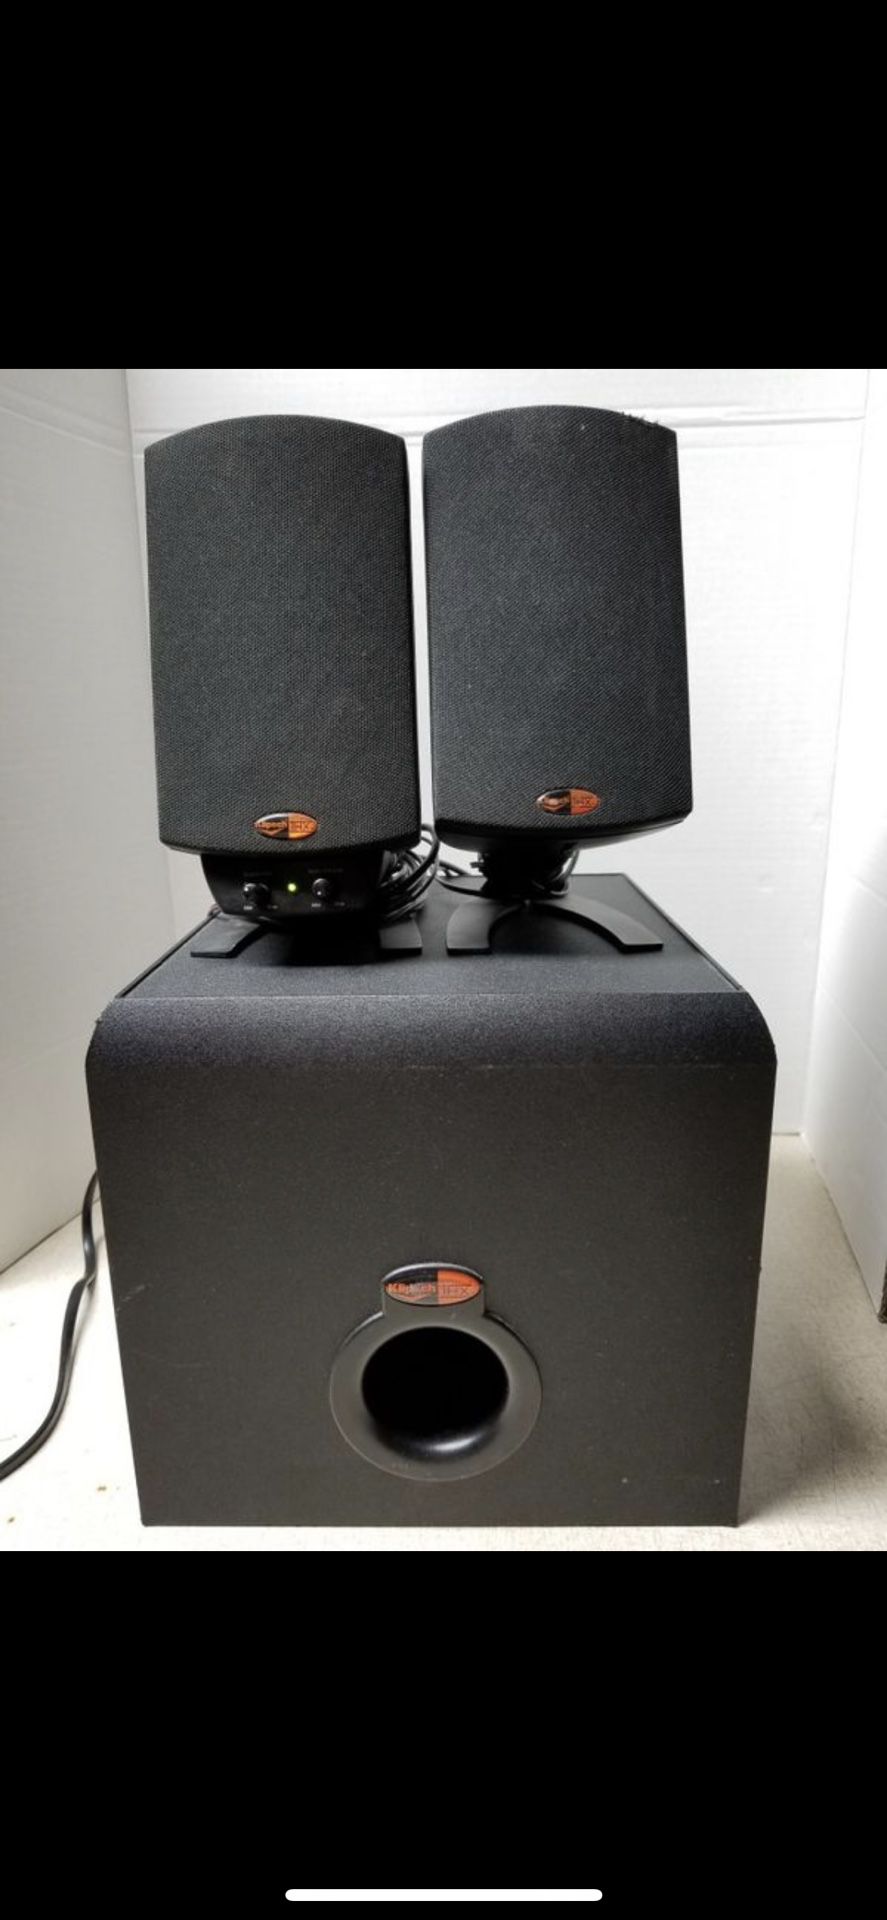 Klipsch promedia 2.1 speakers and sub. Sub not working. Have replacement for $20, don’t know how to do it myself.